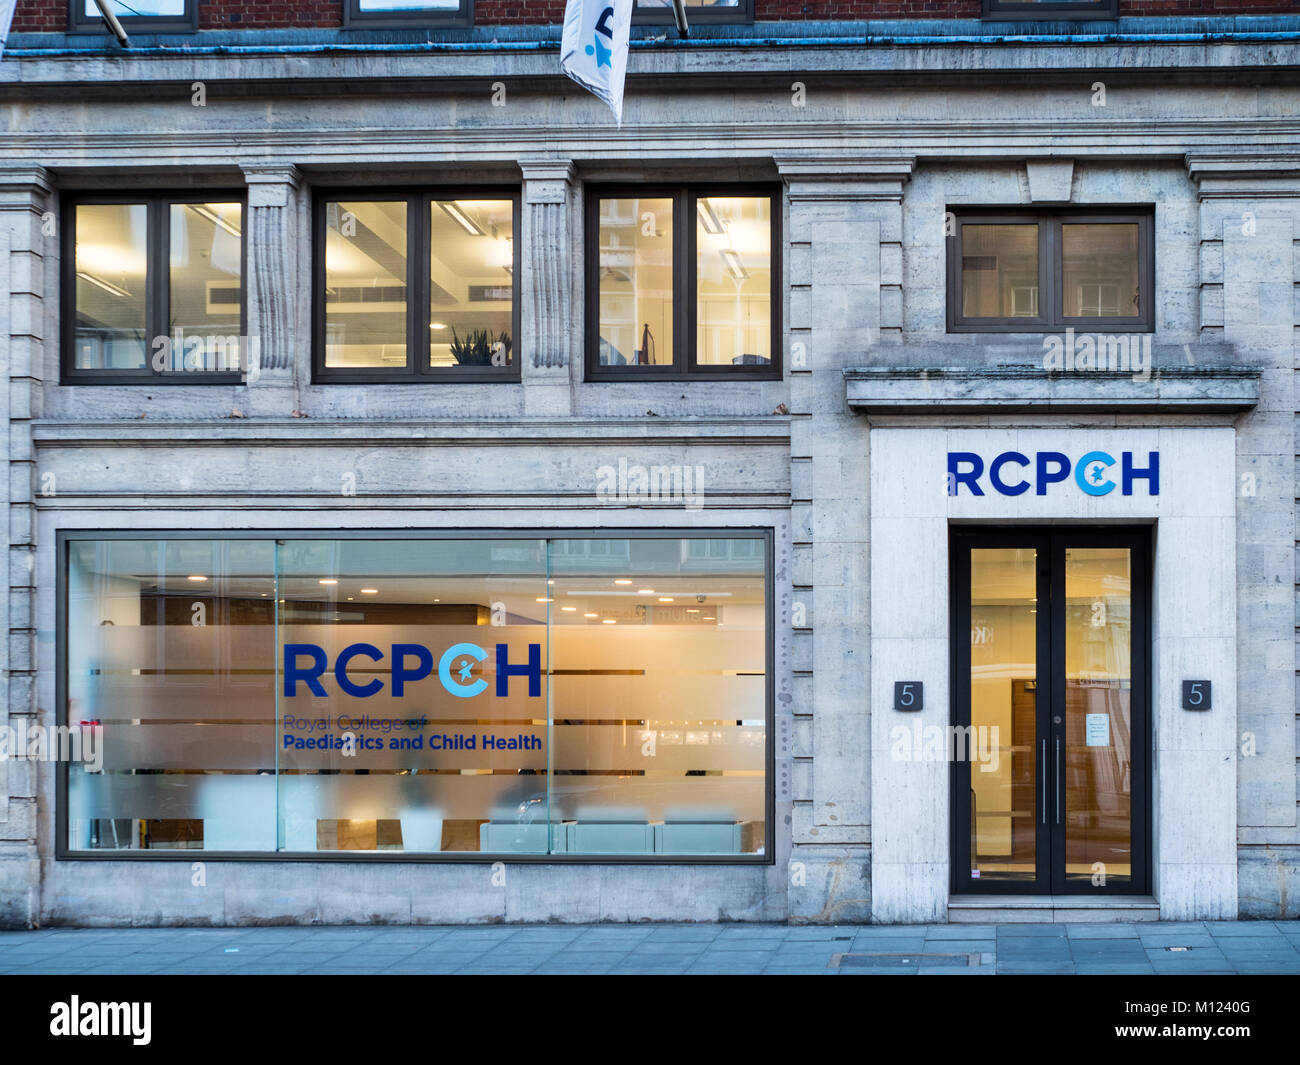 RCPCH - the Royal College of Paediatrics and Child Health on Theobalds Road in Central London, founded in 1996 Stock Photo